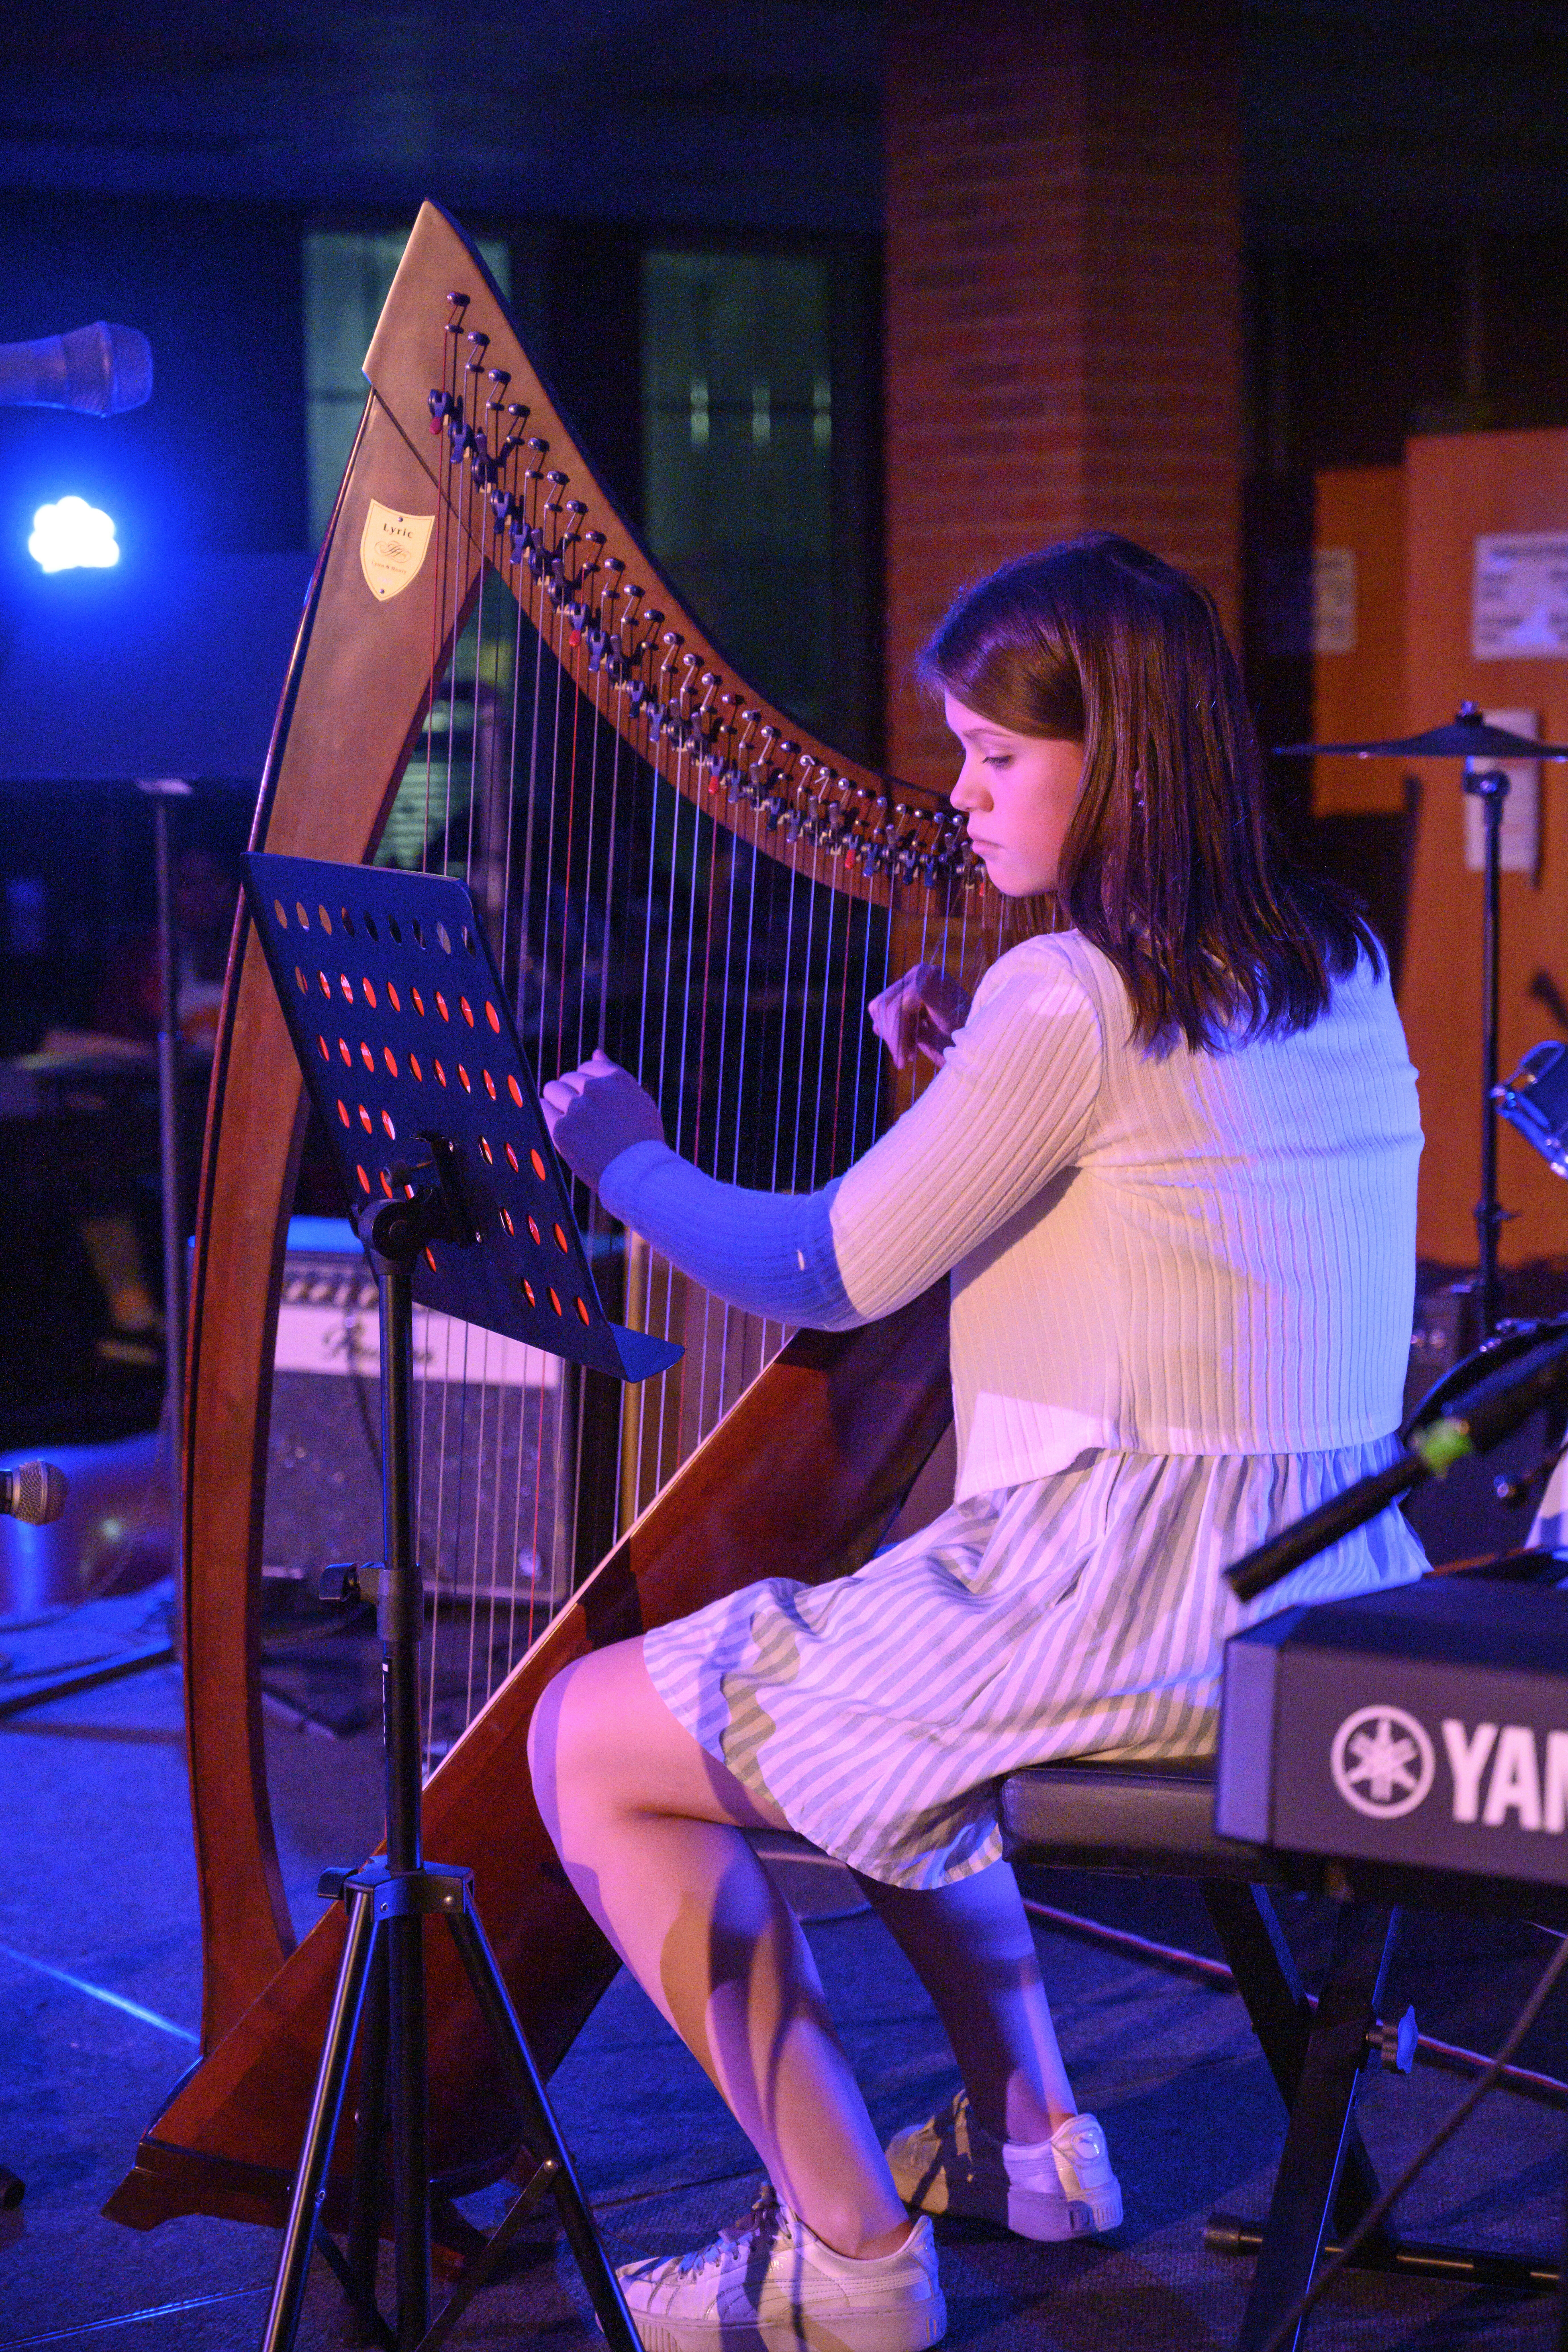 Harp performance at Blue Whale Cafe